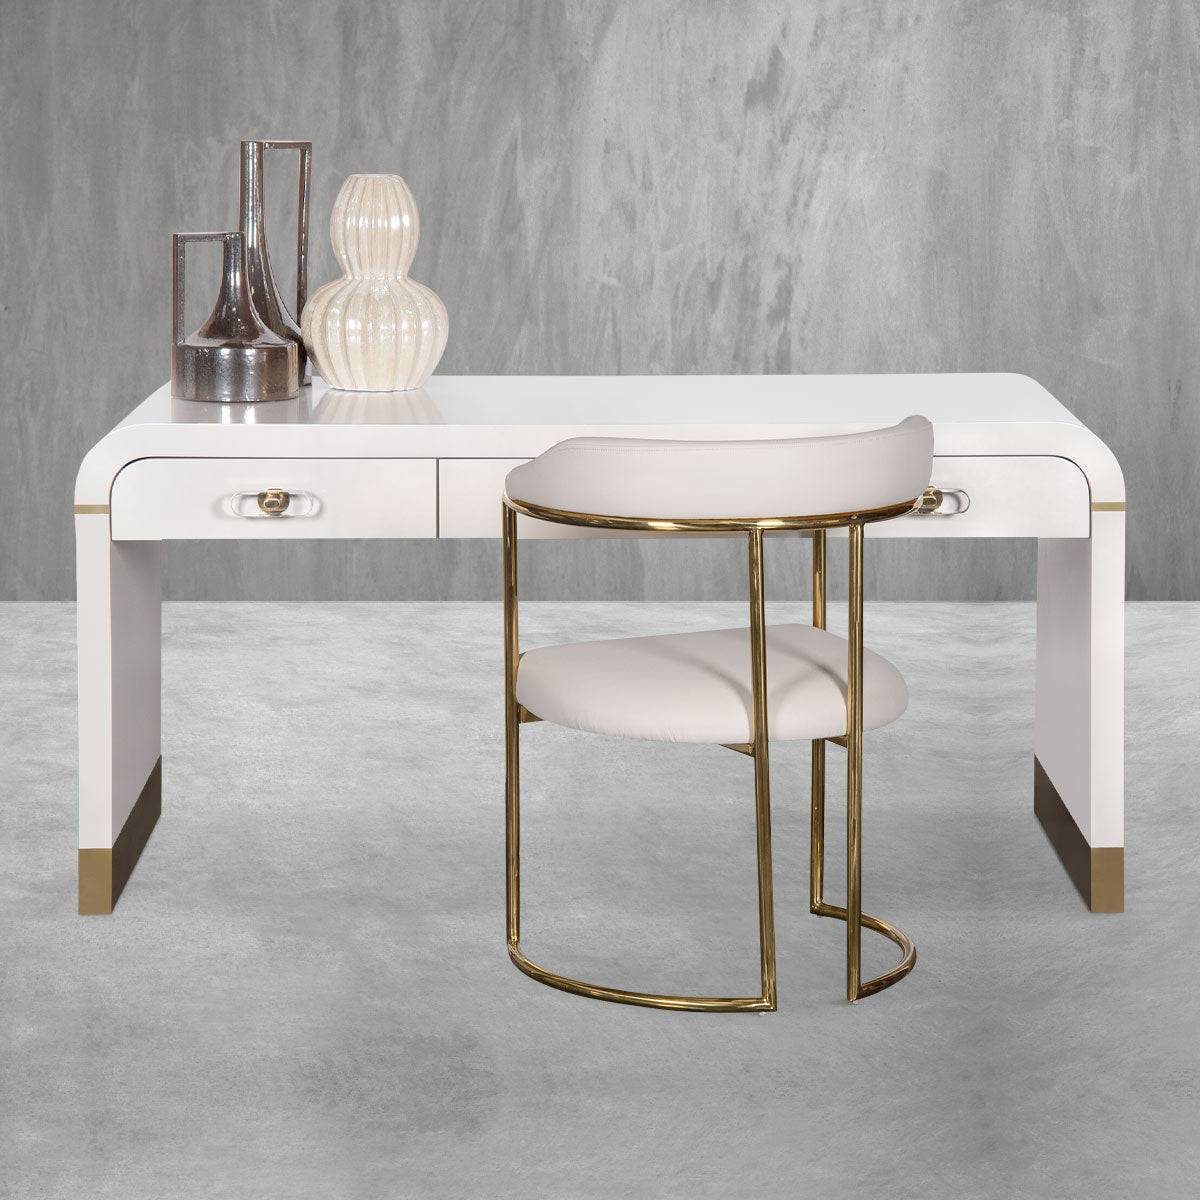 Modern white desk with three drawers, curved edges, solid sides and polished brass accents along with a matching white and brass chair and desk decor.